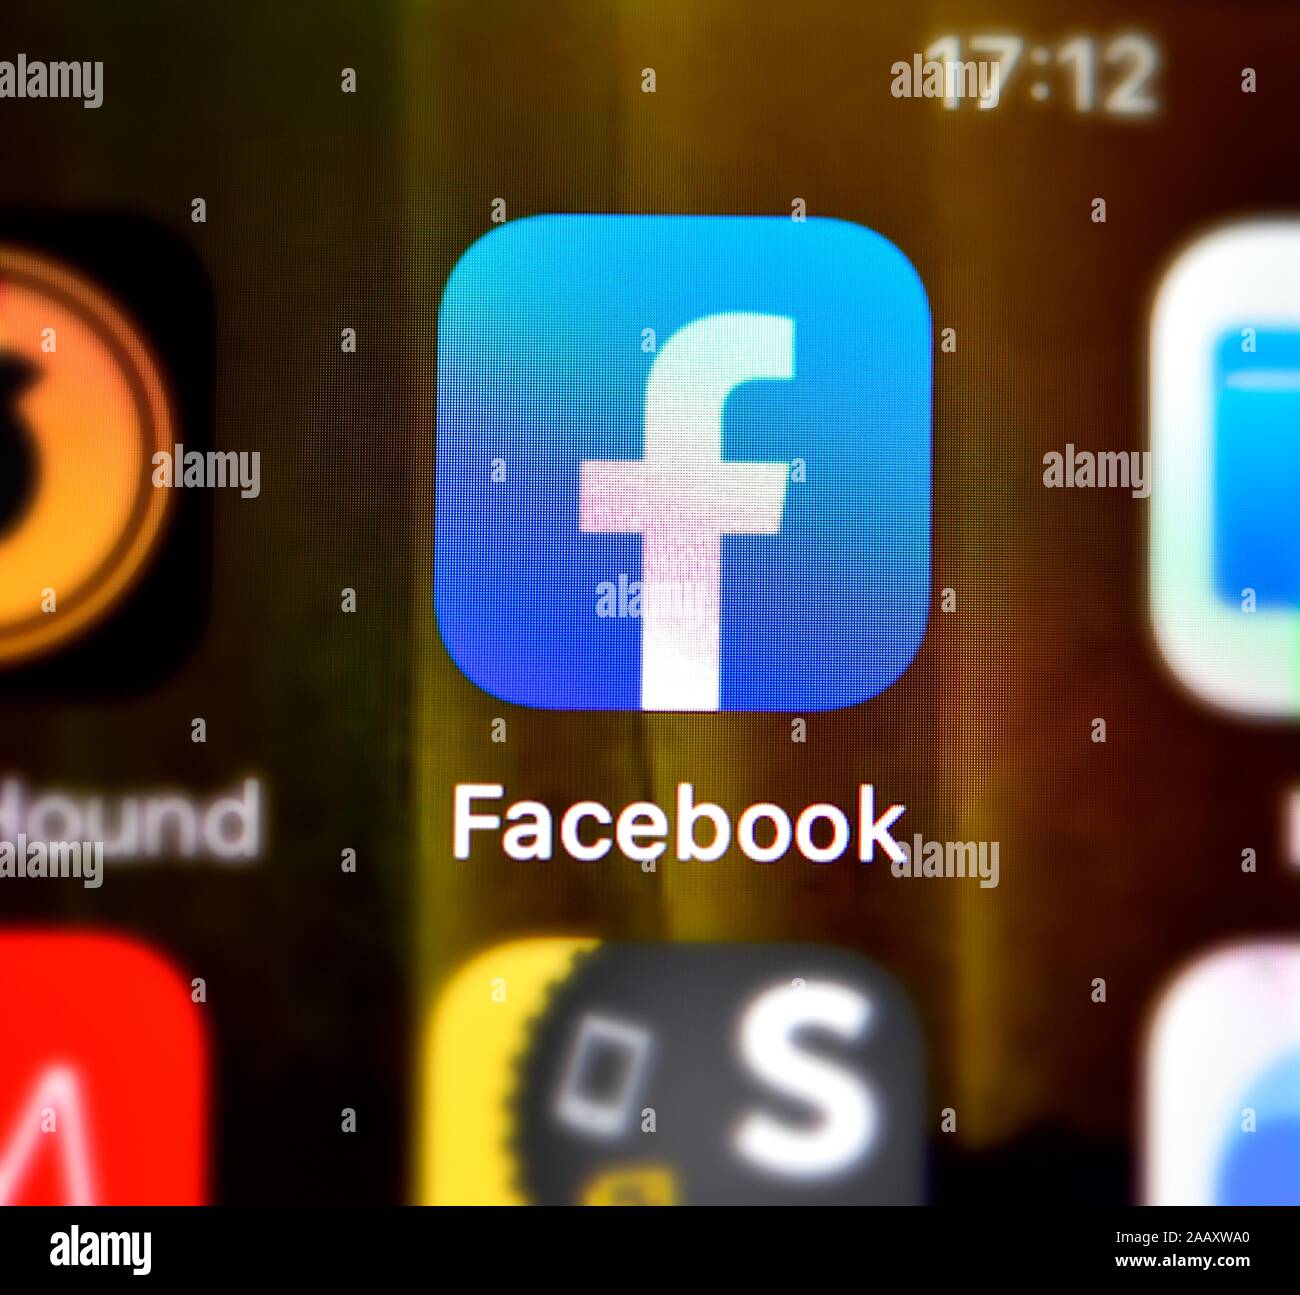 Facebook phone app,on a mobile phone screen Stock Photo